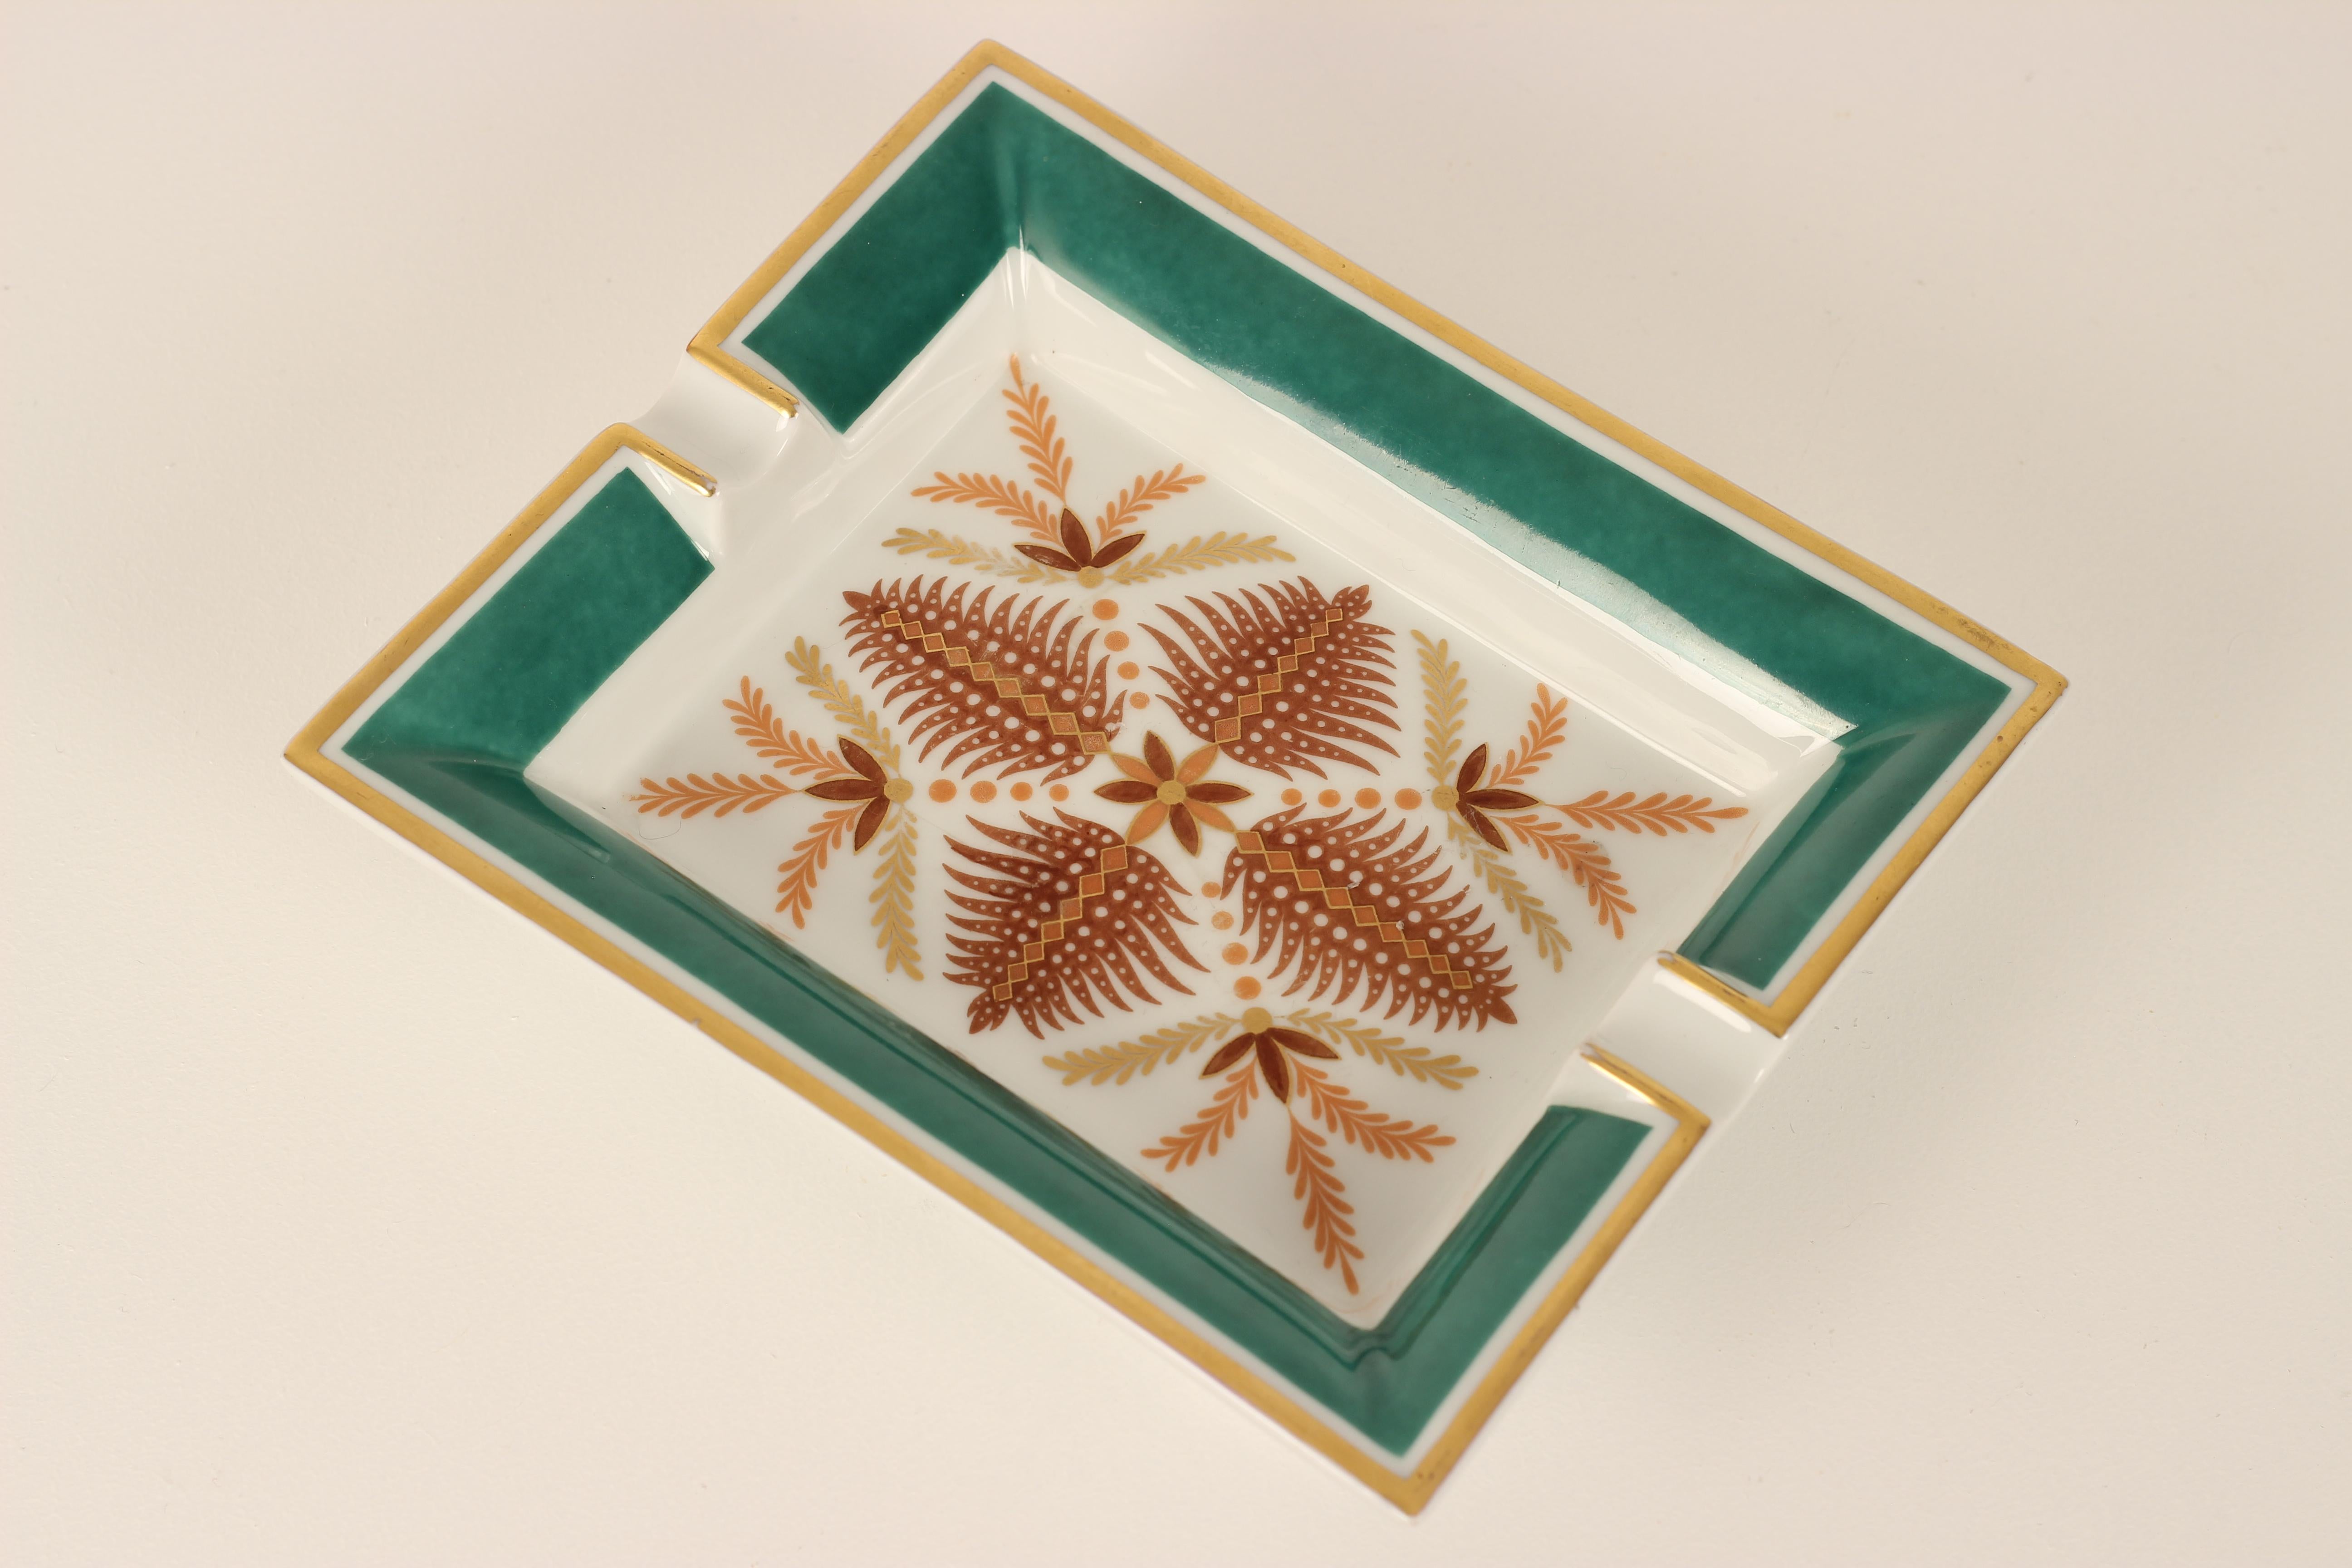 Hermes ashtray or vide-poche Catchall in the botanical style, featuring stylised depiction of ferns and leaves in outline form. With a gilt edge and gem coloured green border. In good overall condition with some minor blemishes (no chips or cracks)